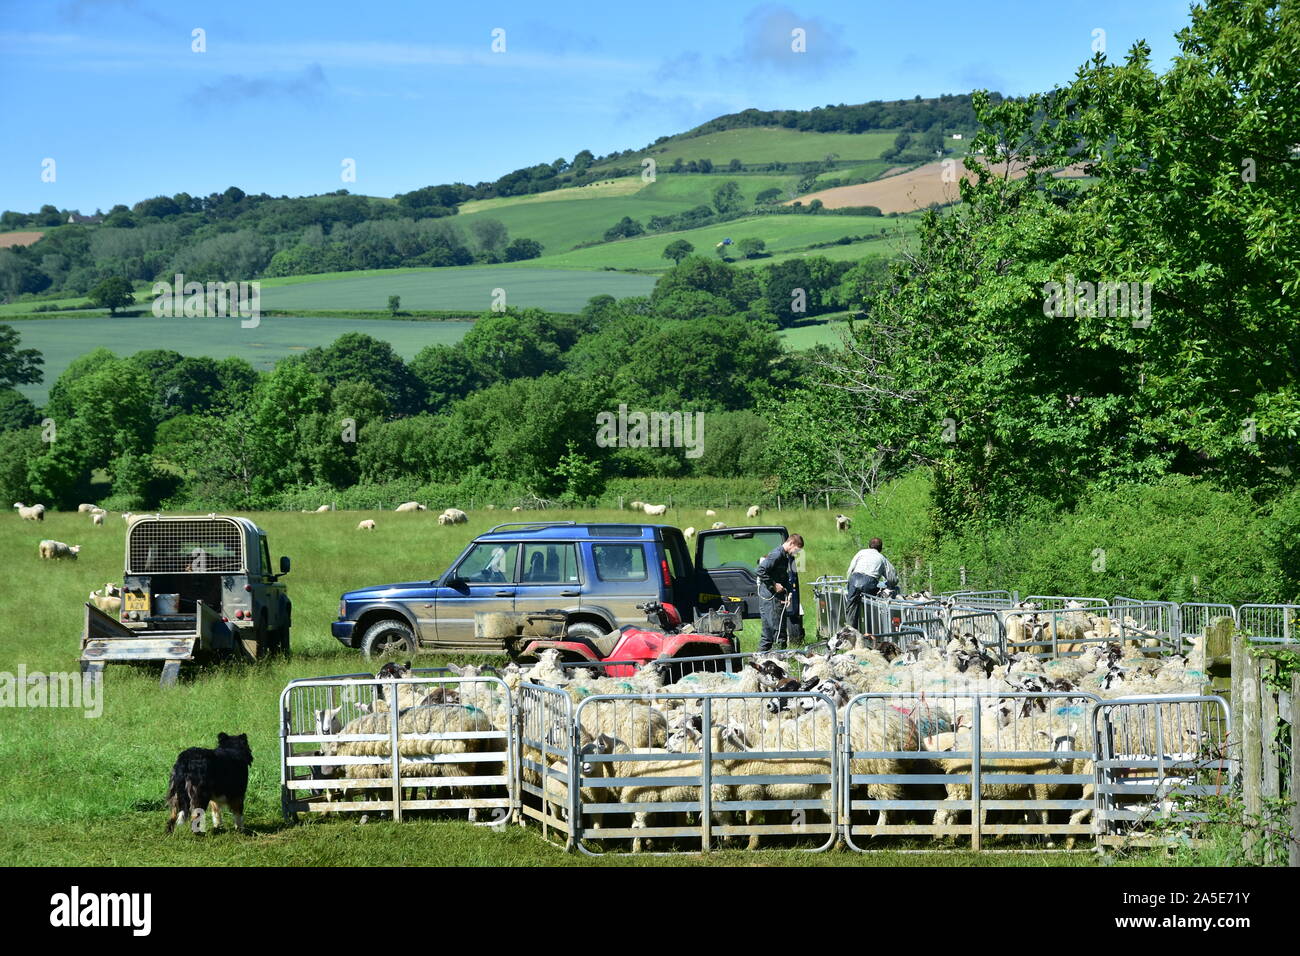 Sheep being wormed, Chideock, Dorset Stock Photo